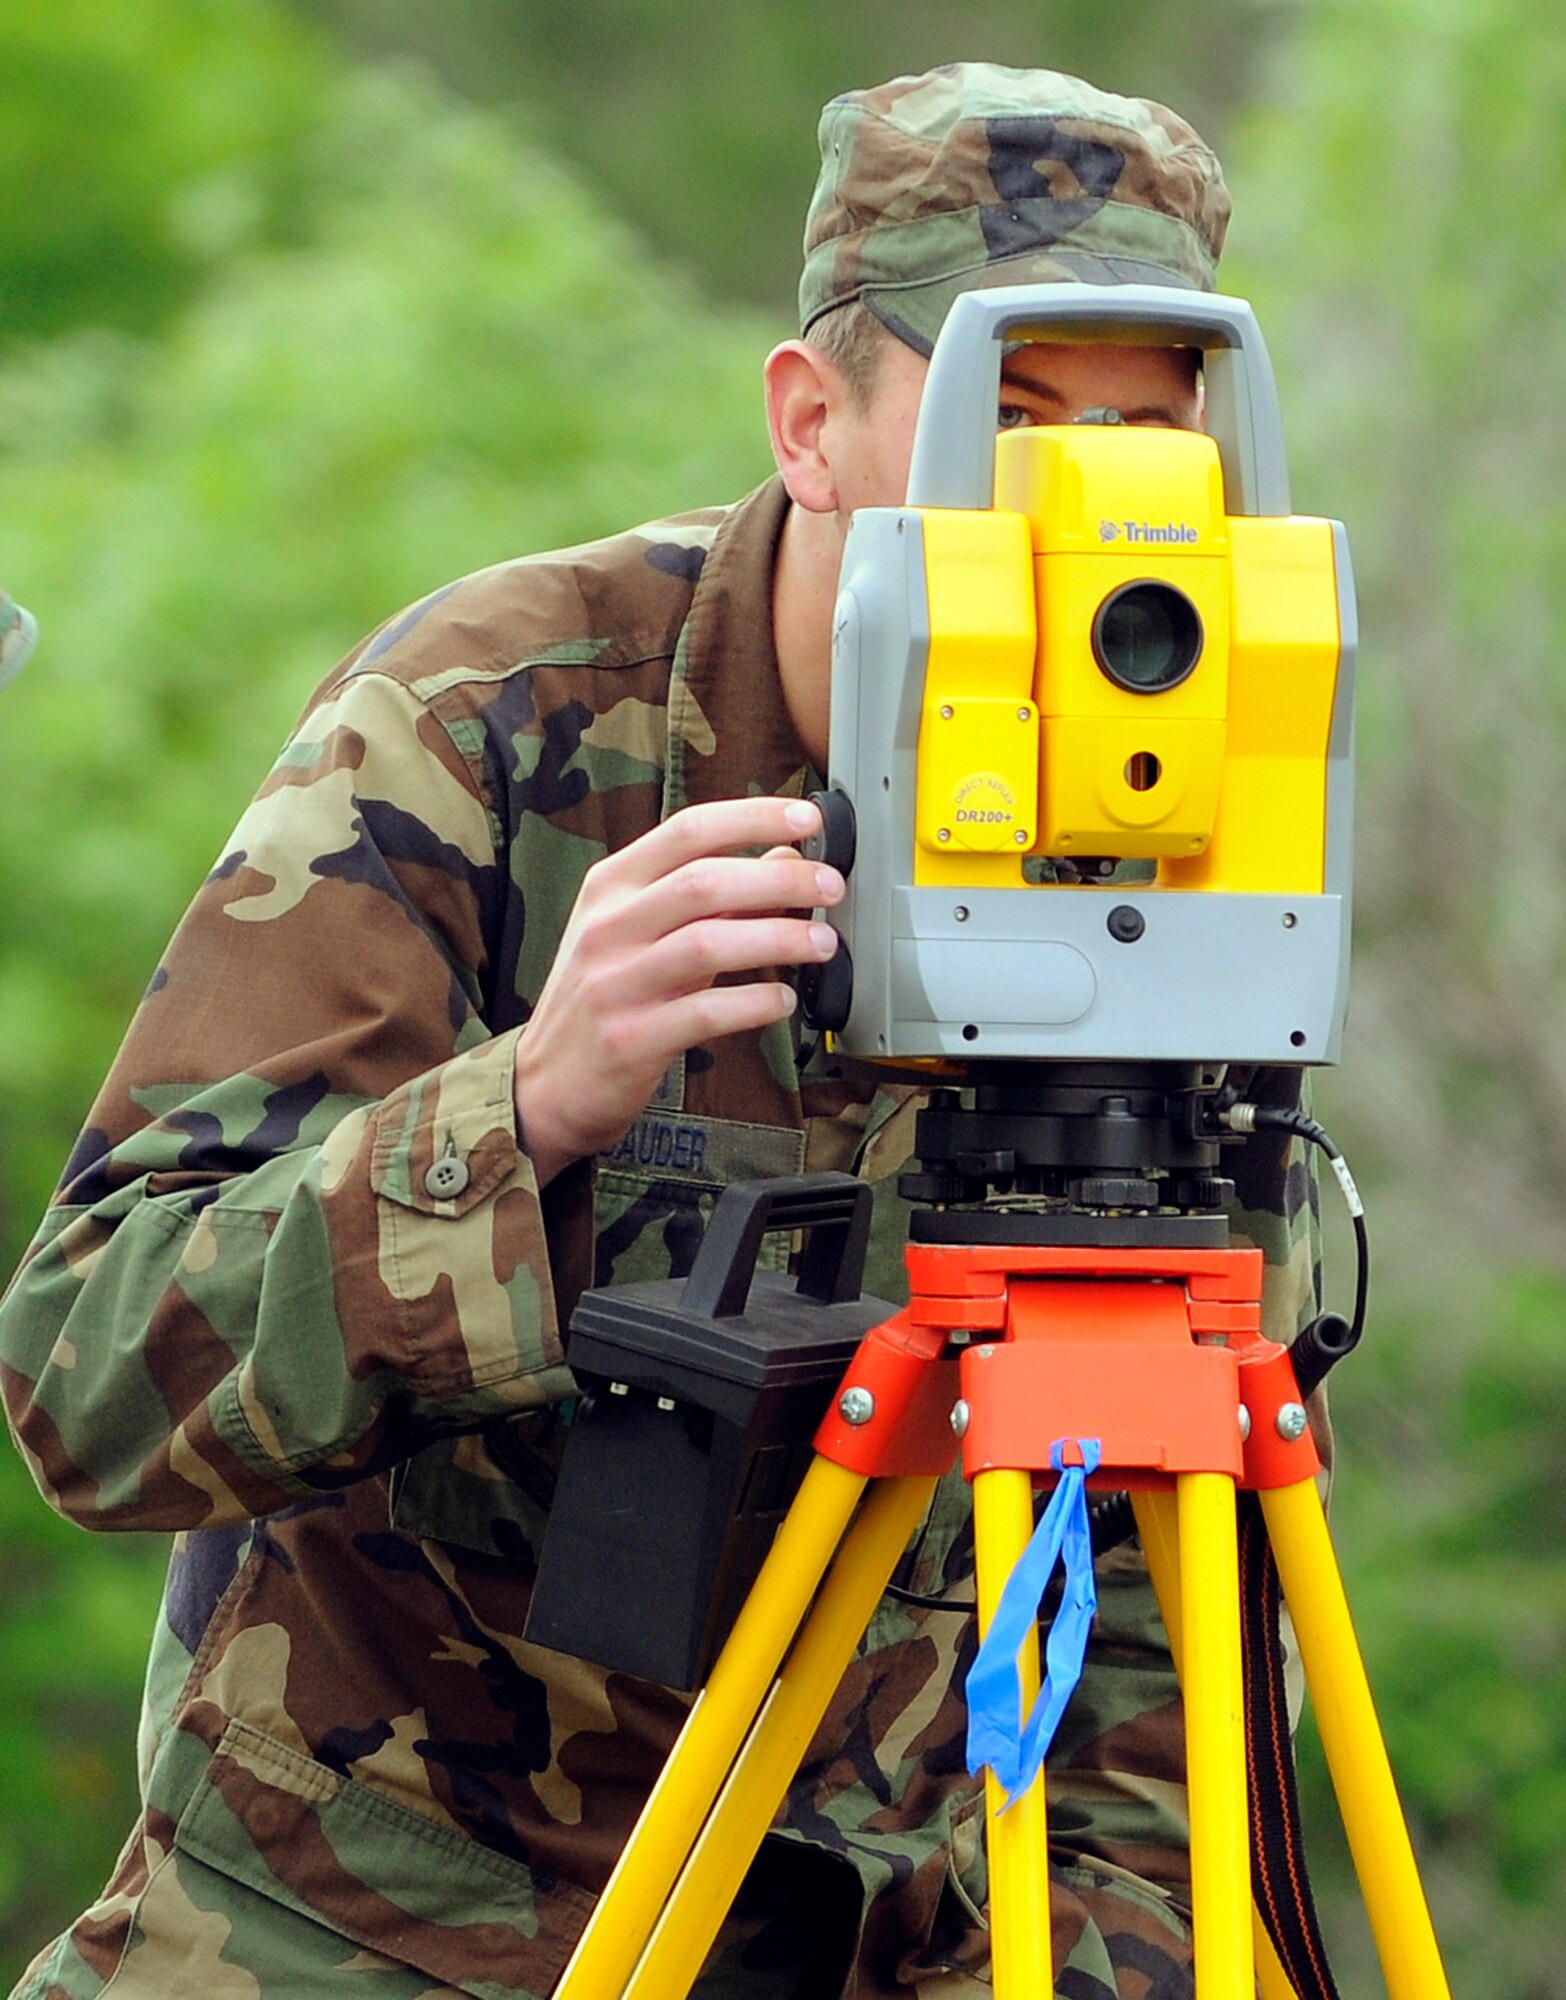 A cadet uses a total station during a Field Engineering and Readiness Activity surveying activity June 11. Cadets from the classes of 2010 and 2011, ROTC and the U.S. Military Academy took part in activities that started June 1 and finished June 19. (U.S. Air Force photo/Dave Ahlschwede)